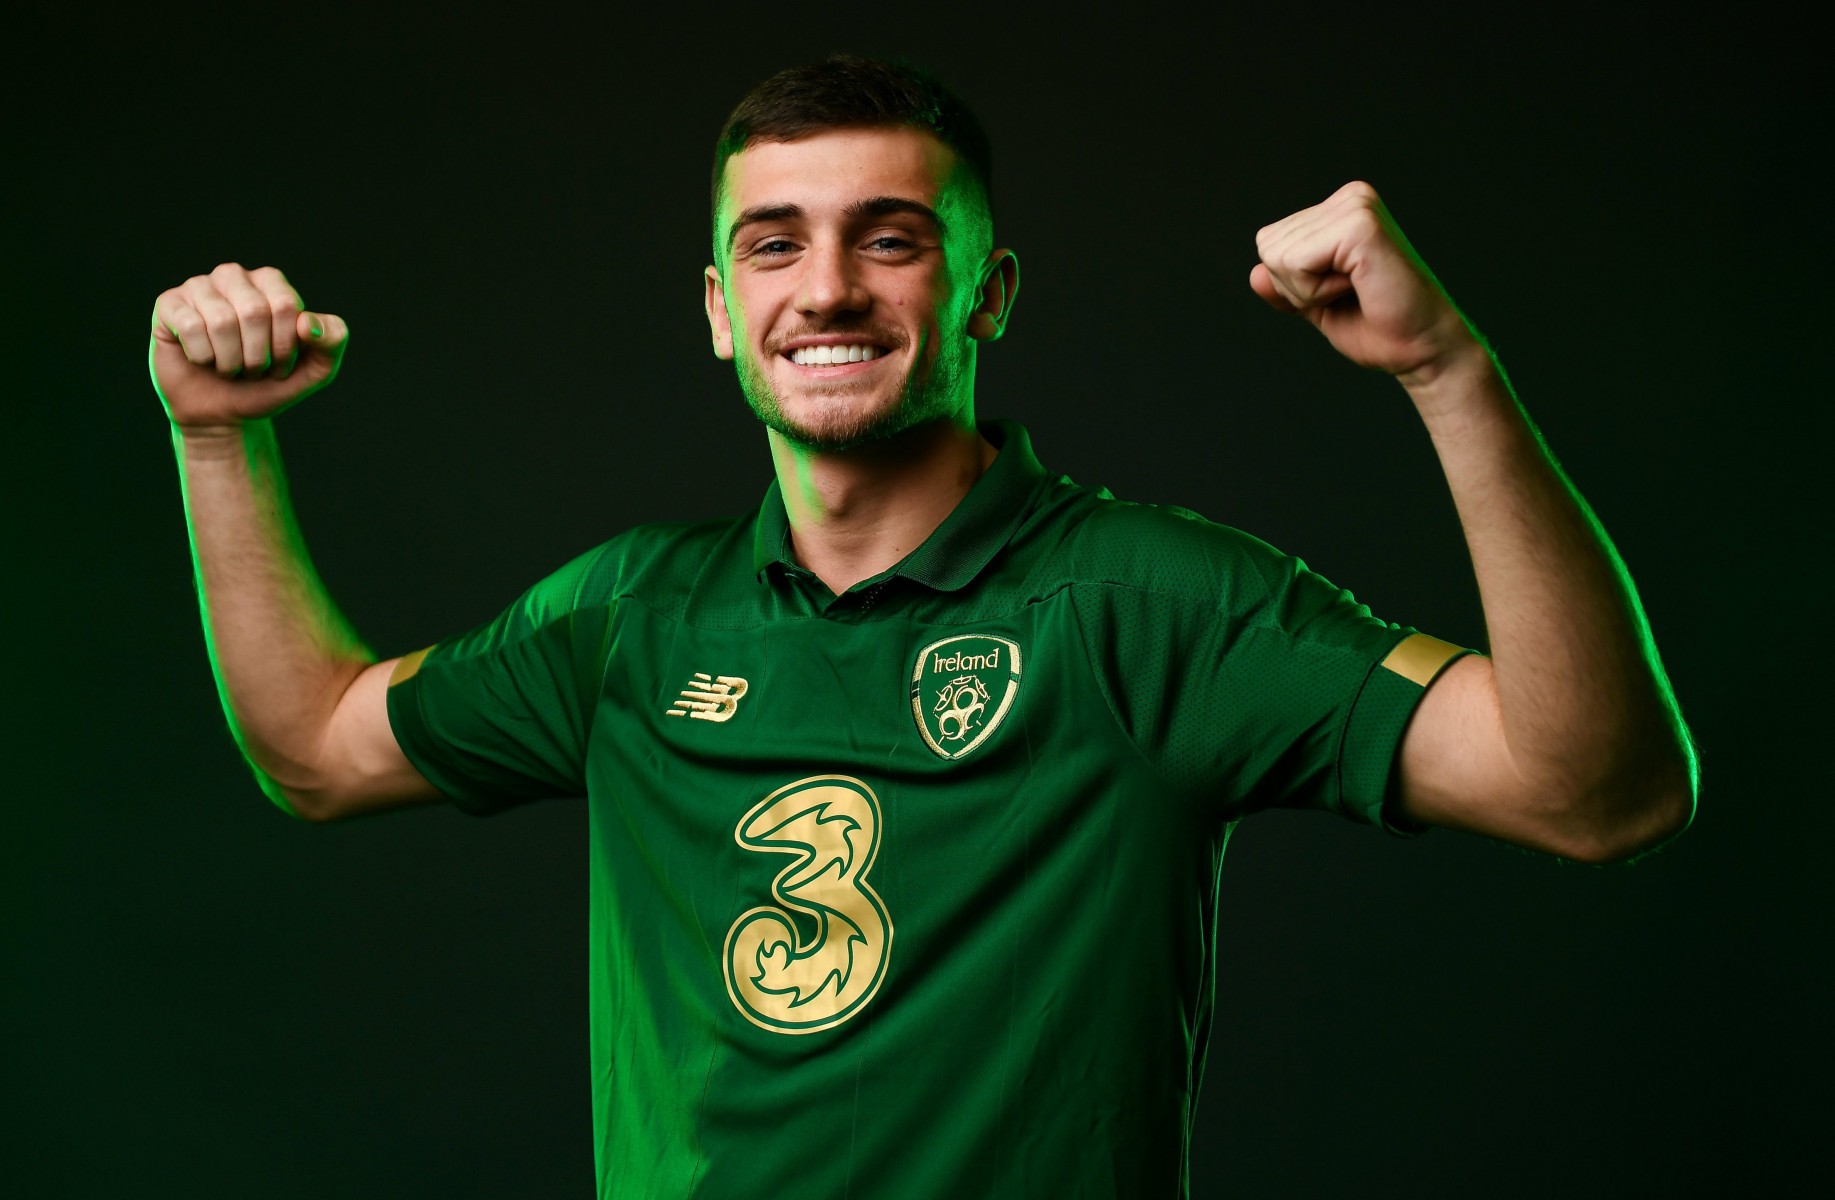 Spurs prospect Troy Parrott made his debut for Republic of Ireland last month